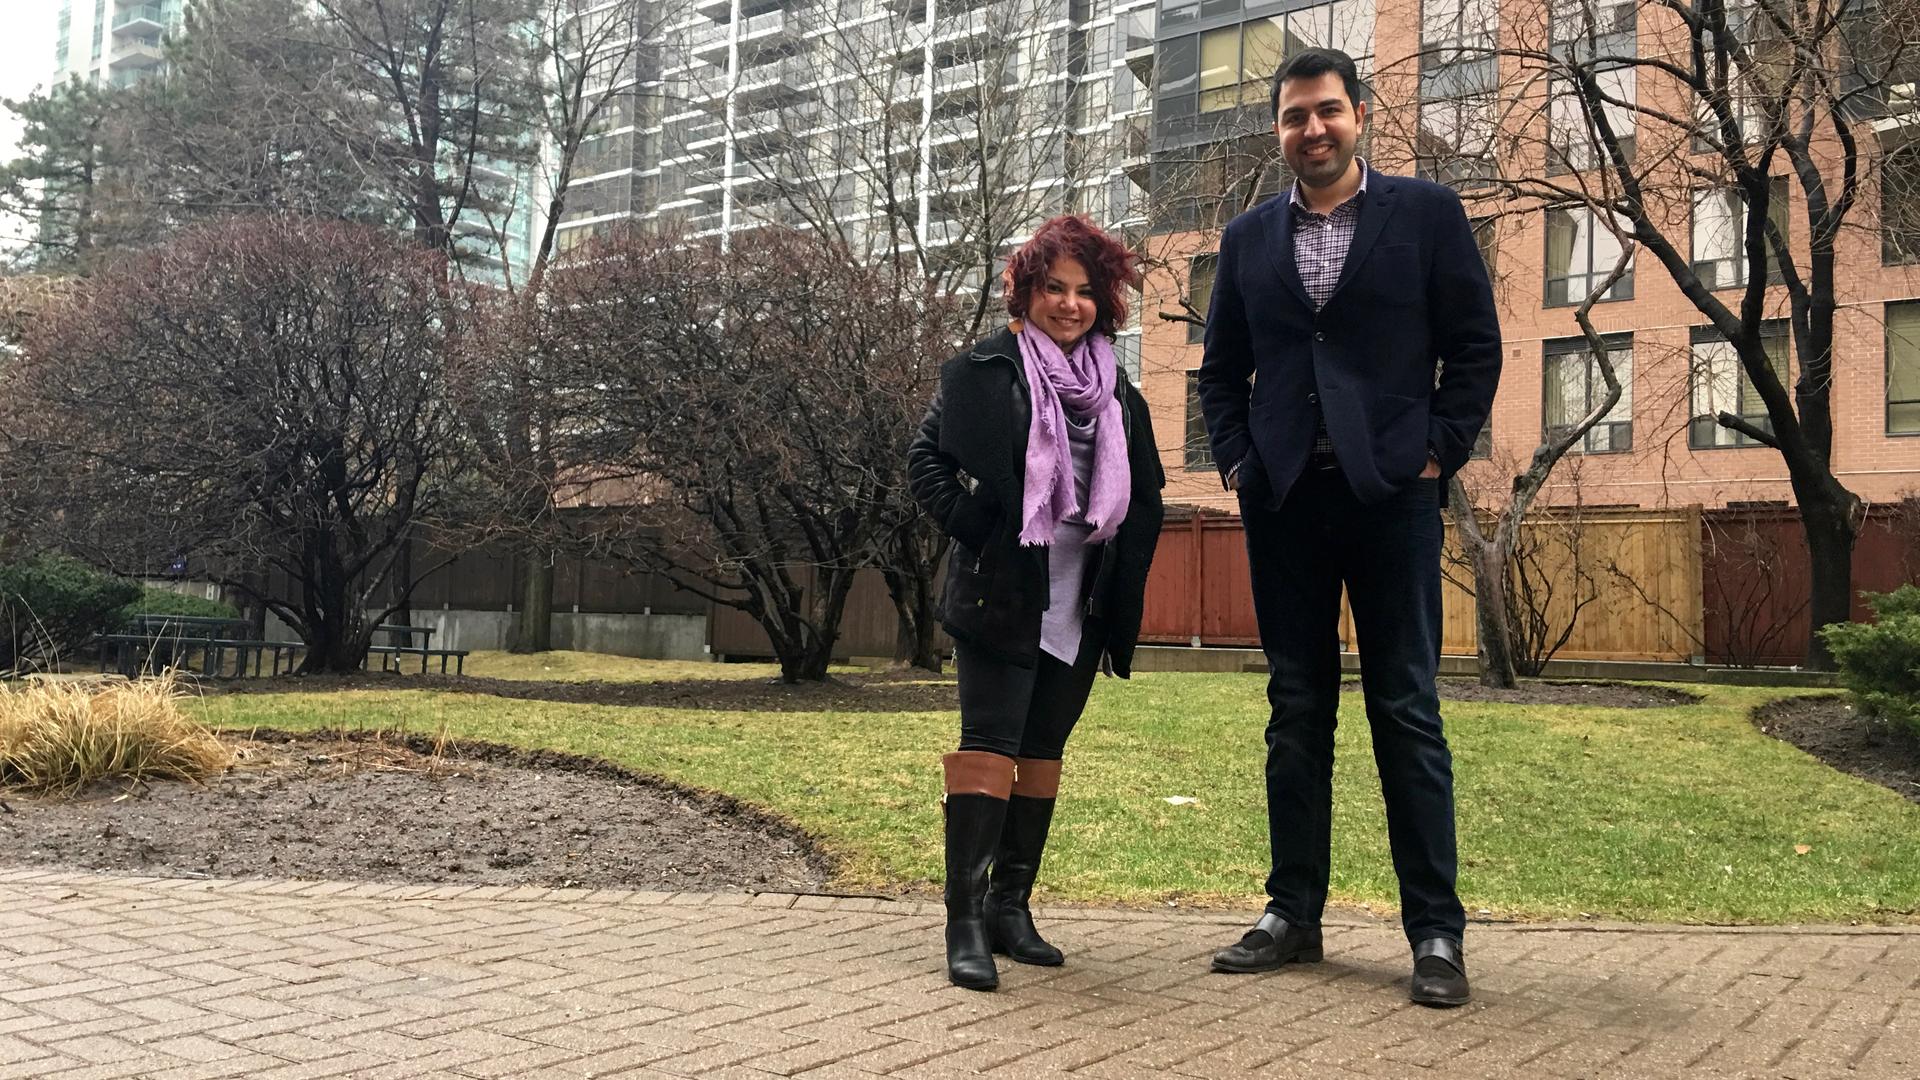 Soudeh Ghasemi (L) and Bijan Ahmadi are among the Iranian-Canadians in Toronto who hope that Canada will normalize relations with Iran sooner than later.  